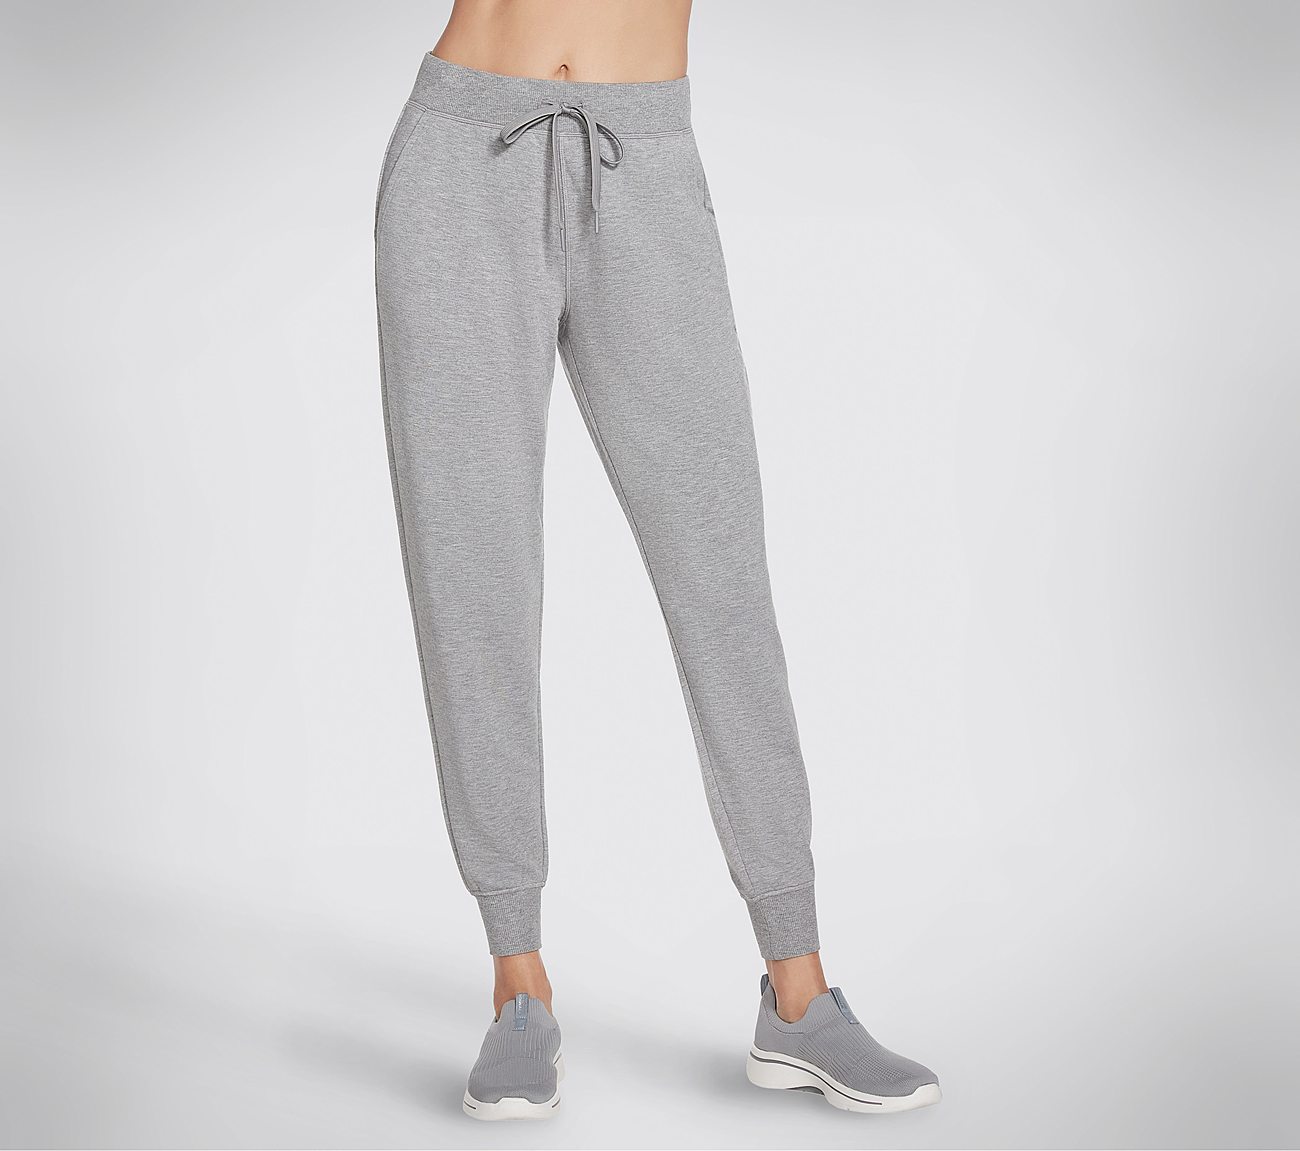 RESTFUL JOGGER, LIGHT GREY Apparels Lateral View